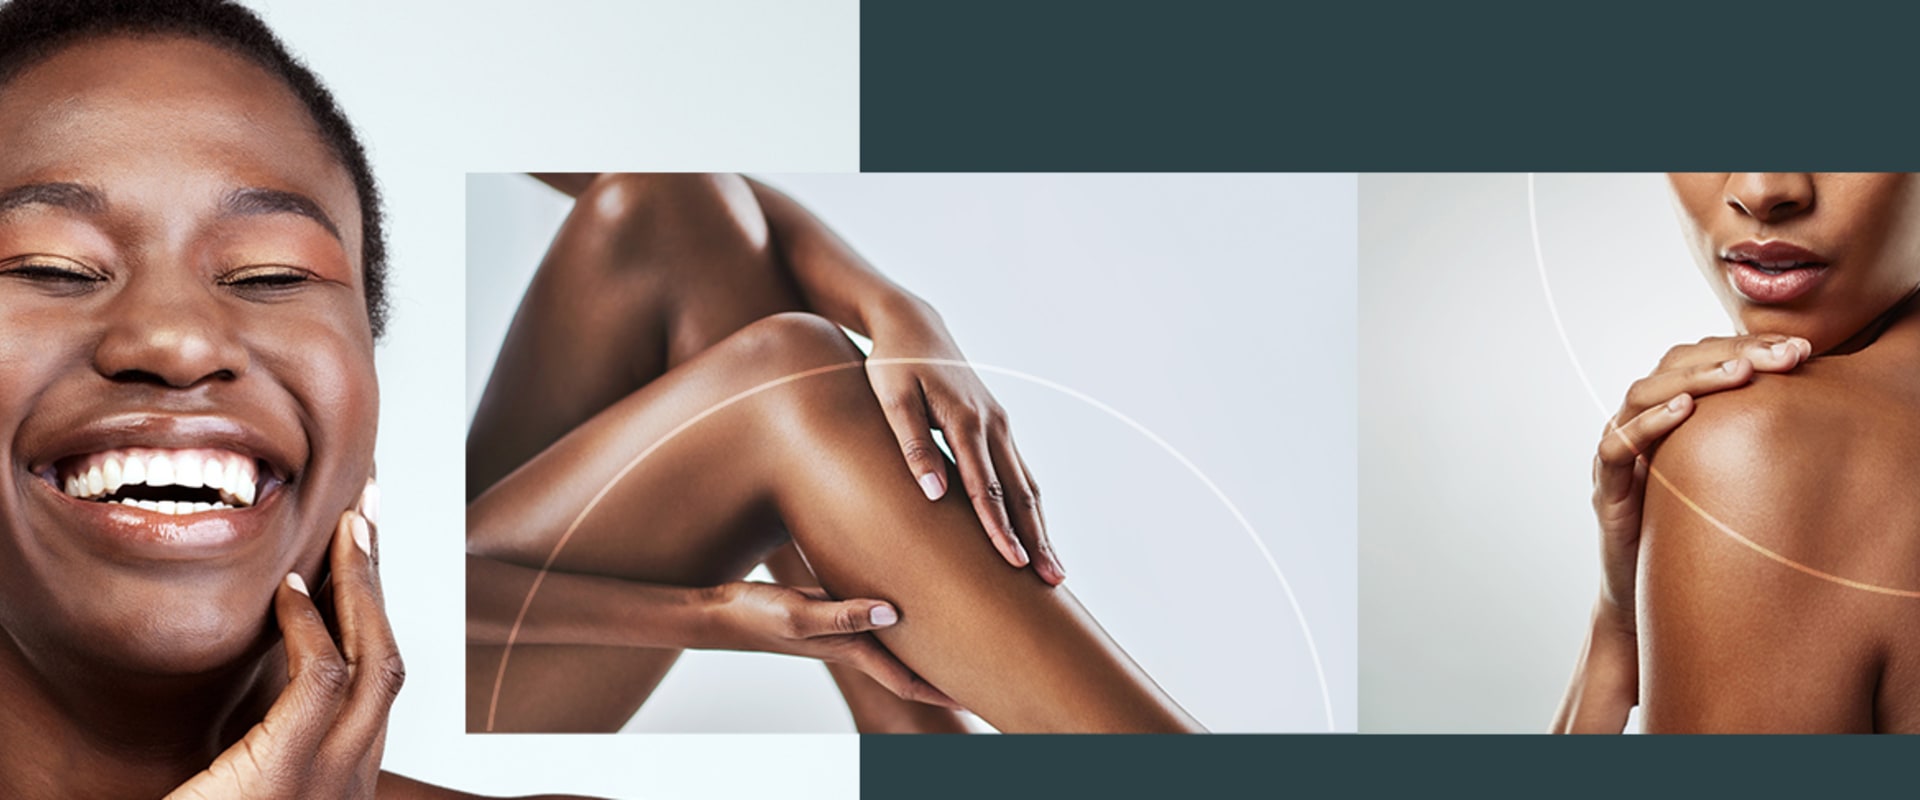 Reducing Risks and Side Effects of Laser Hair Removal for Dark Skin